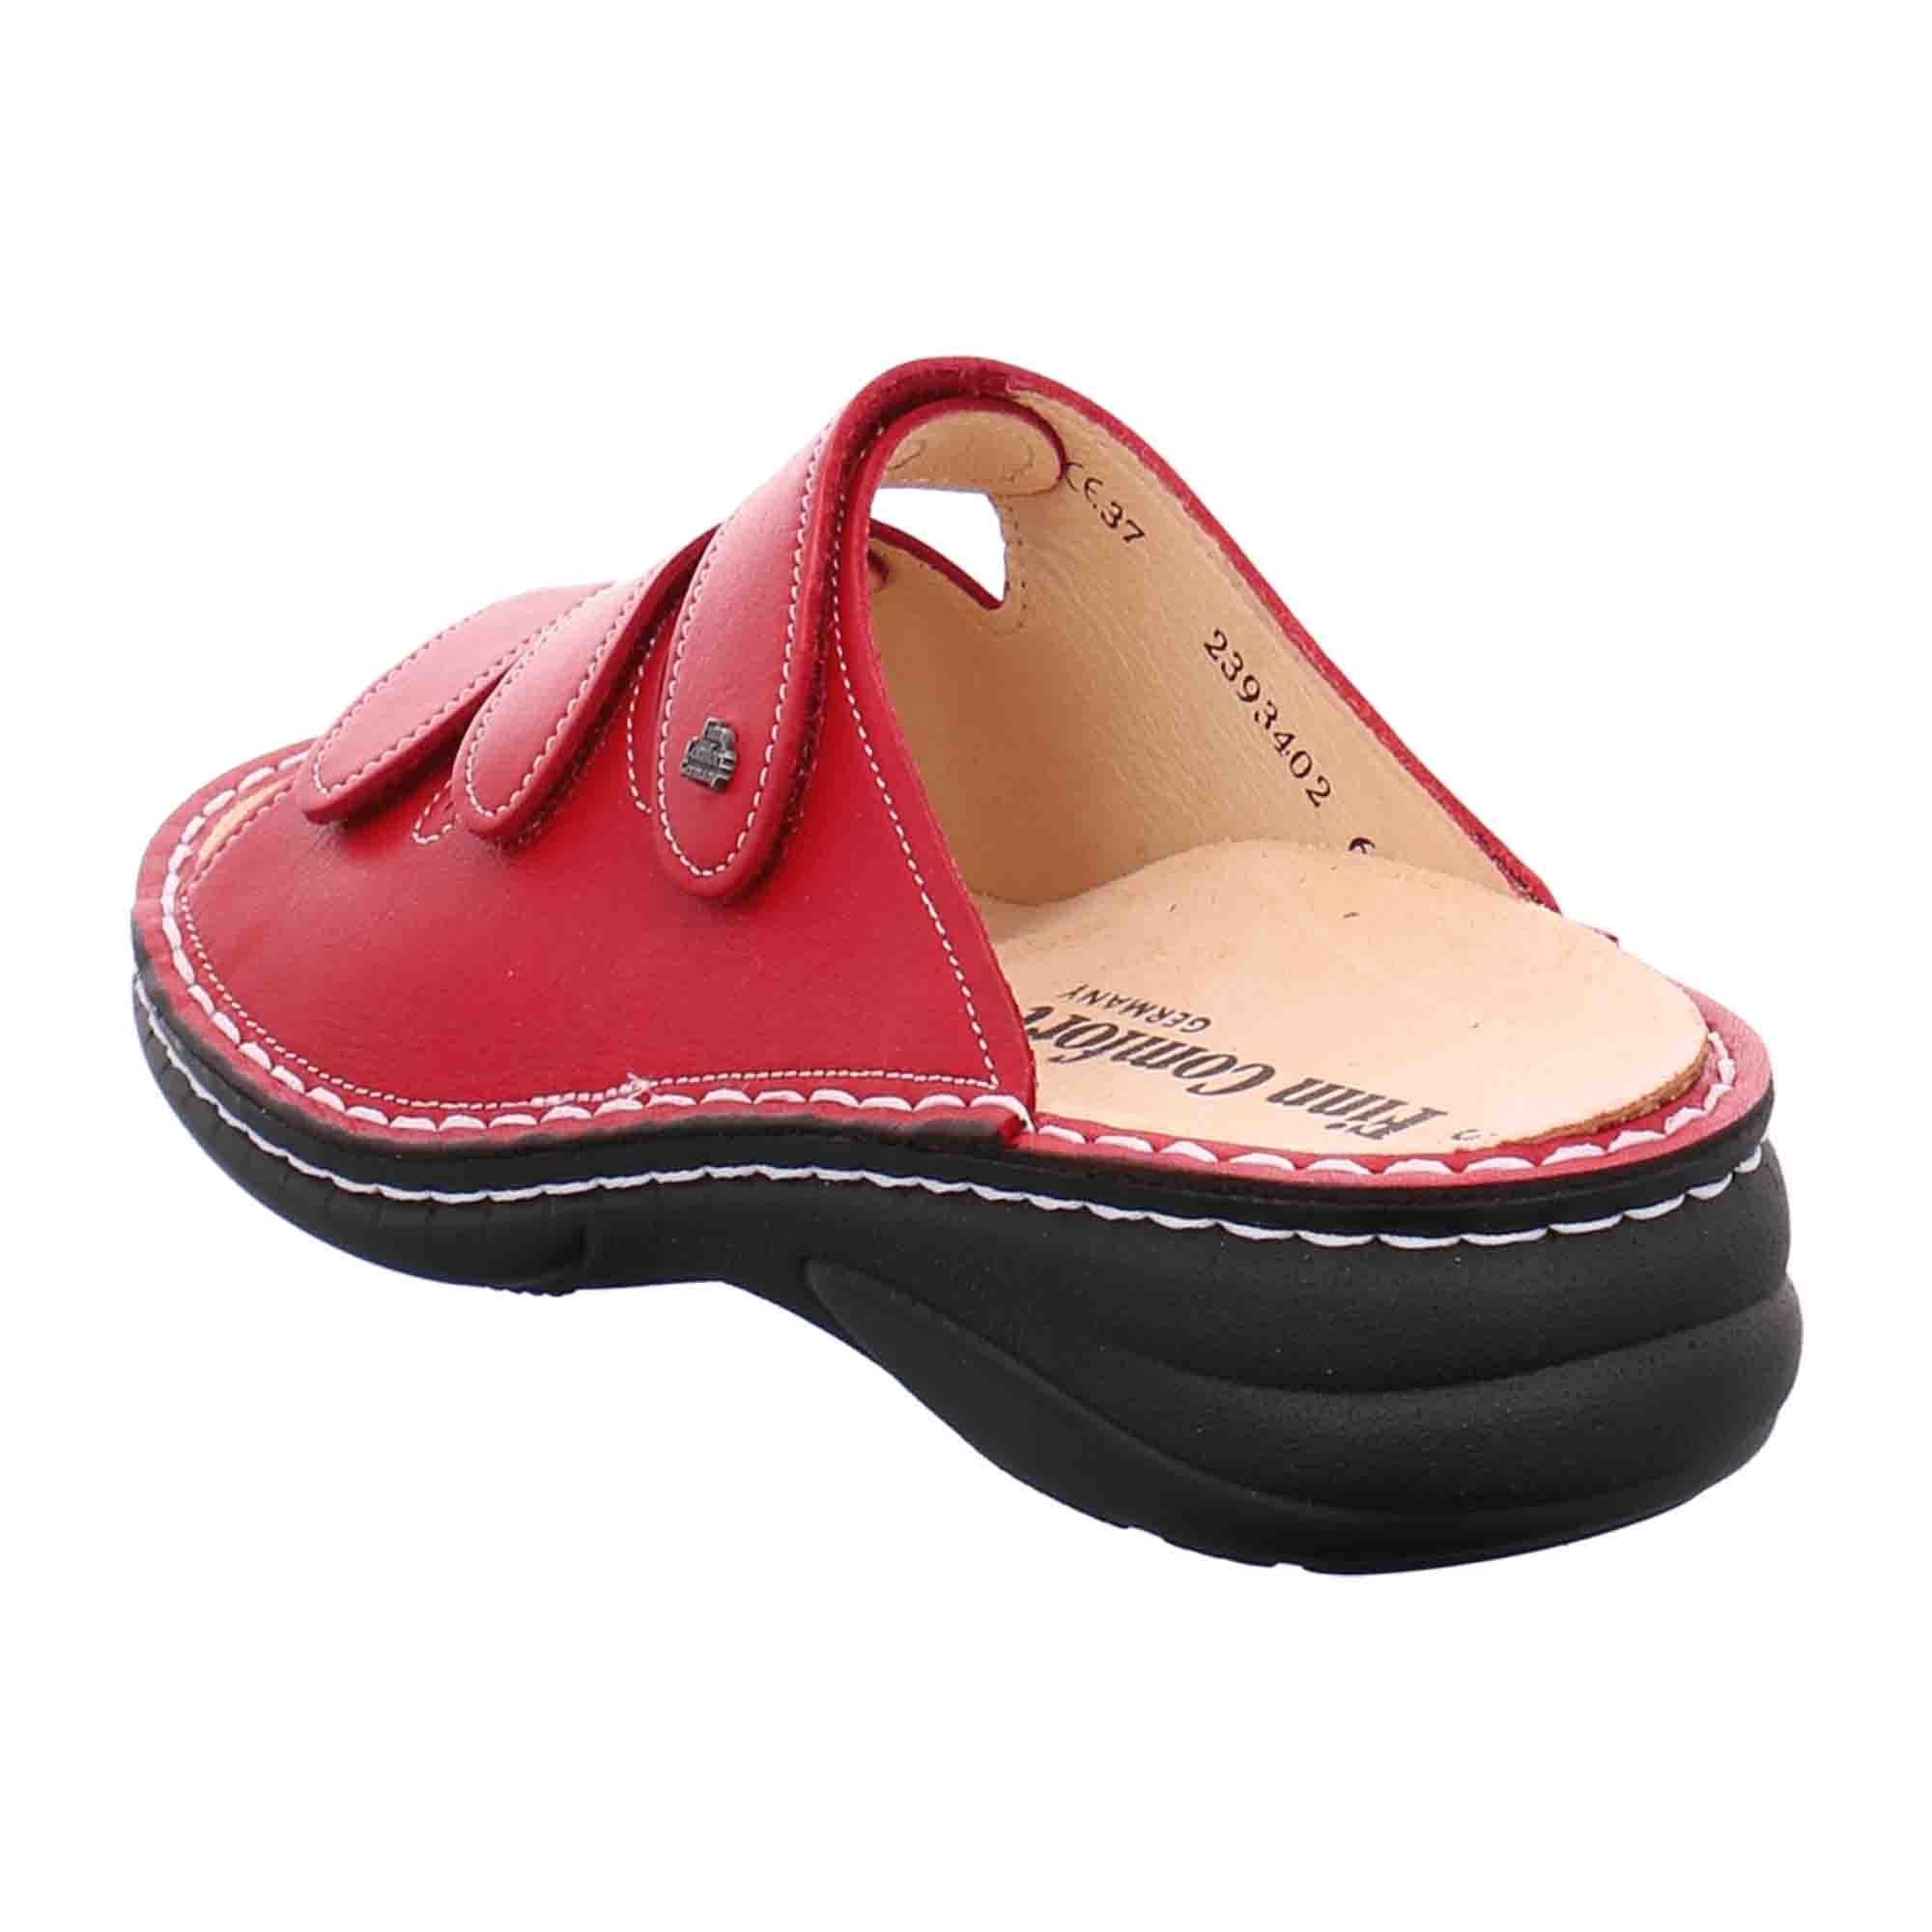 Finn Comfort Hellas Red Shoes for Women, Comfortable and Durable - Model 2620-60442